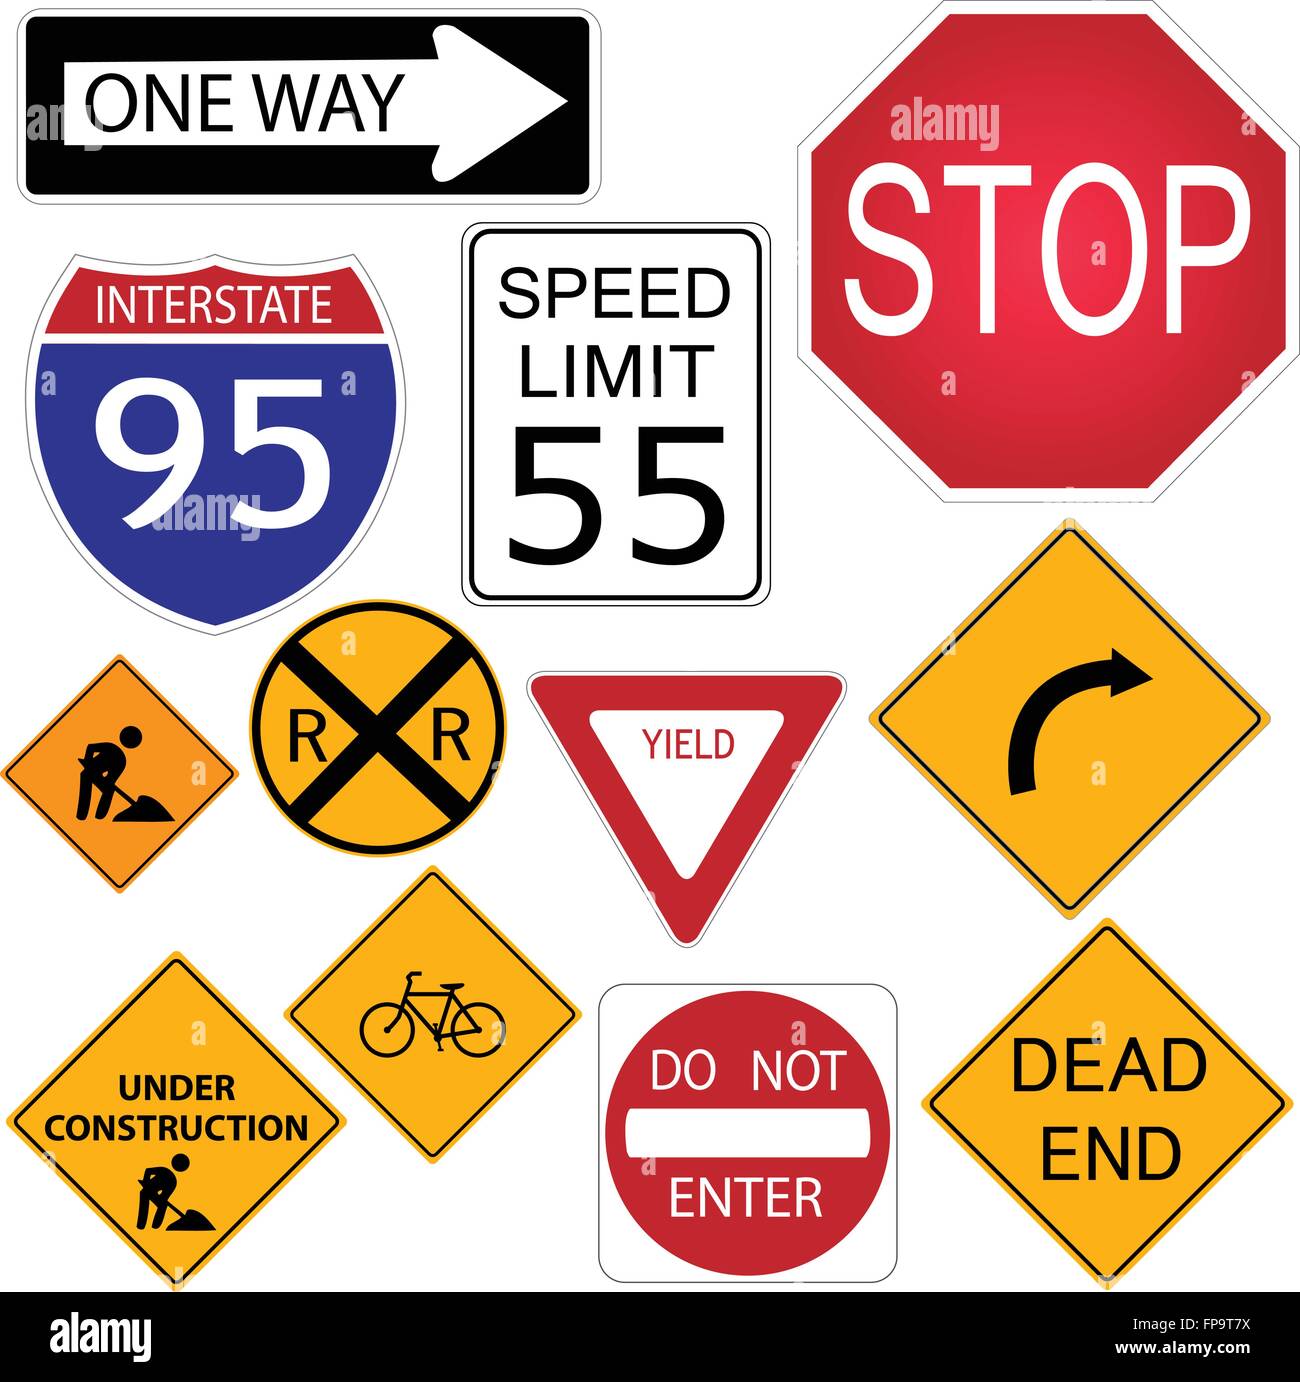 Image of various road signs. Stock Vector